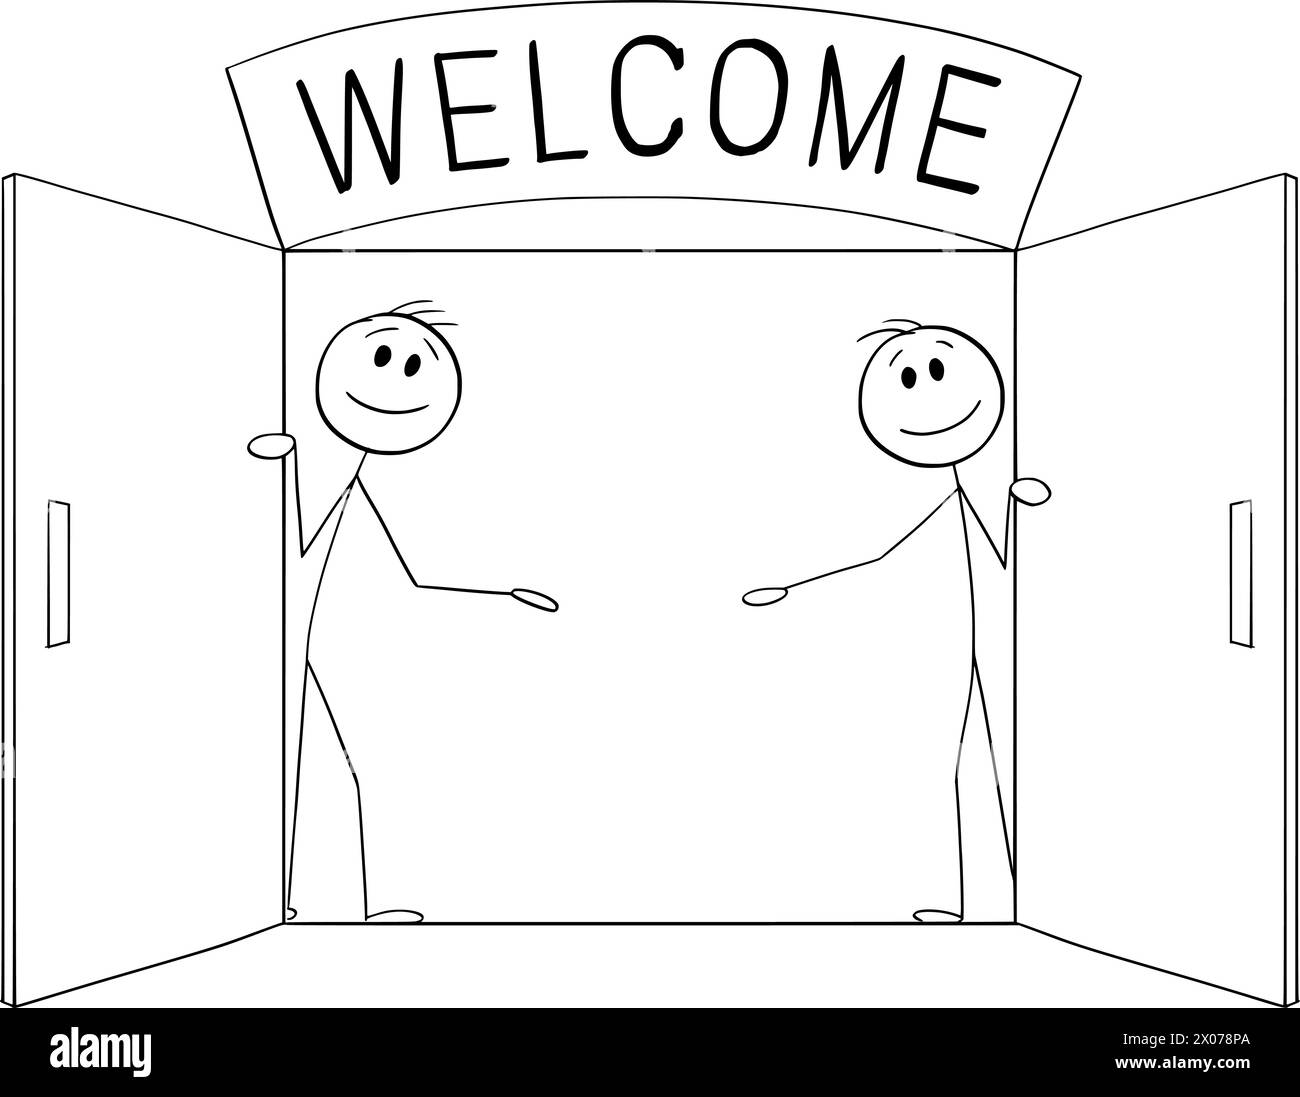 Welcoming and go inside or enter door with welcome sign, vector cartoon stick figure or character illustration. Stock Vector